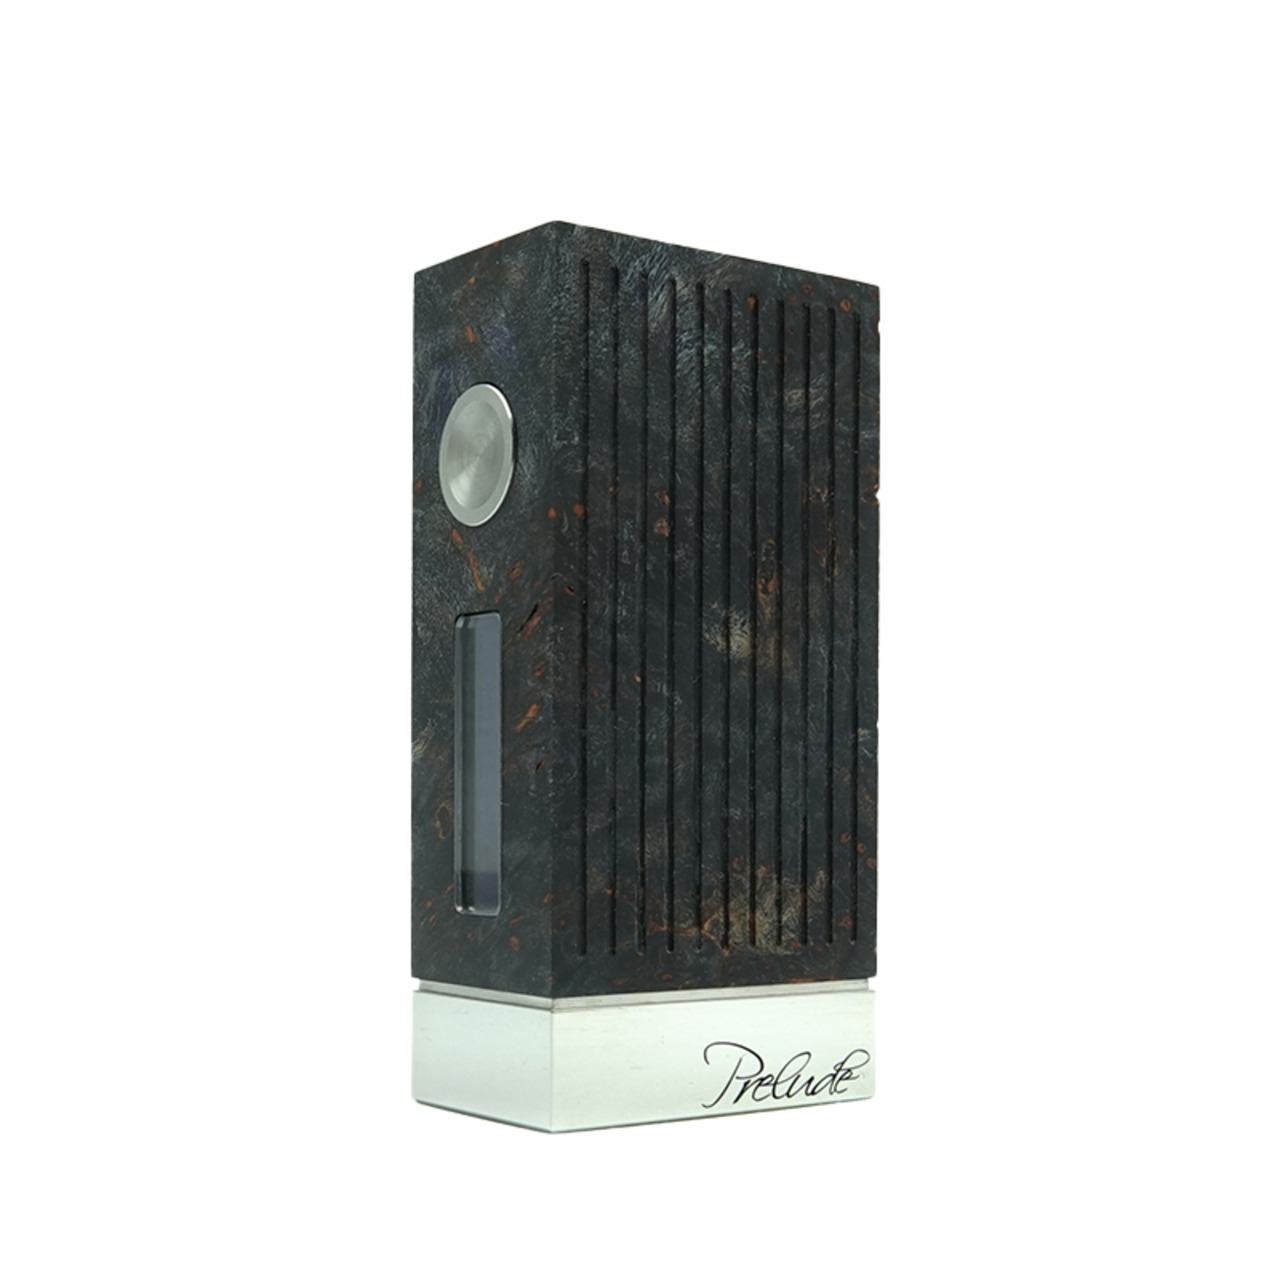 Prelude Micro LE stab wood by XTRA MILE VAPE